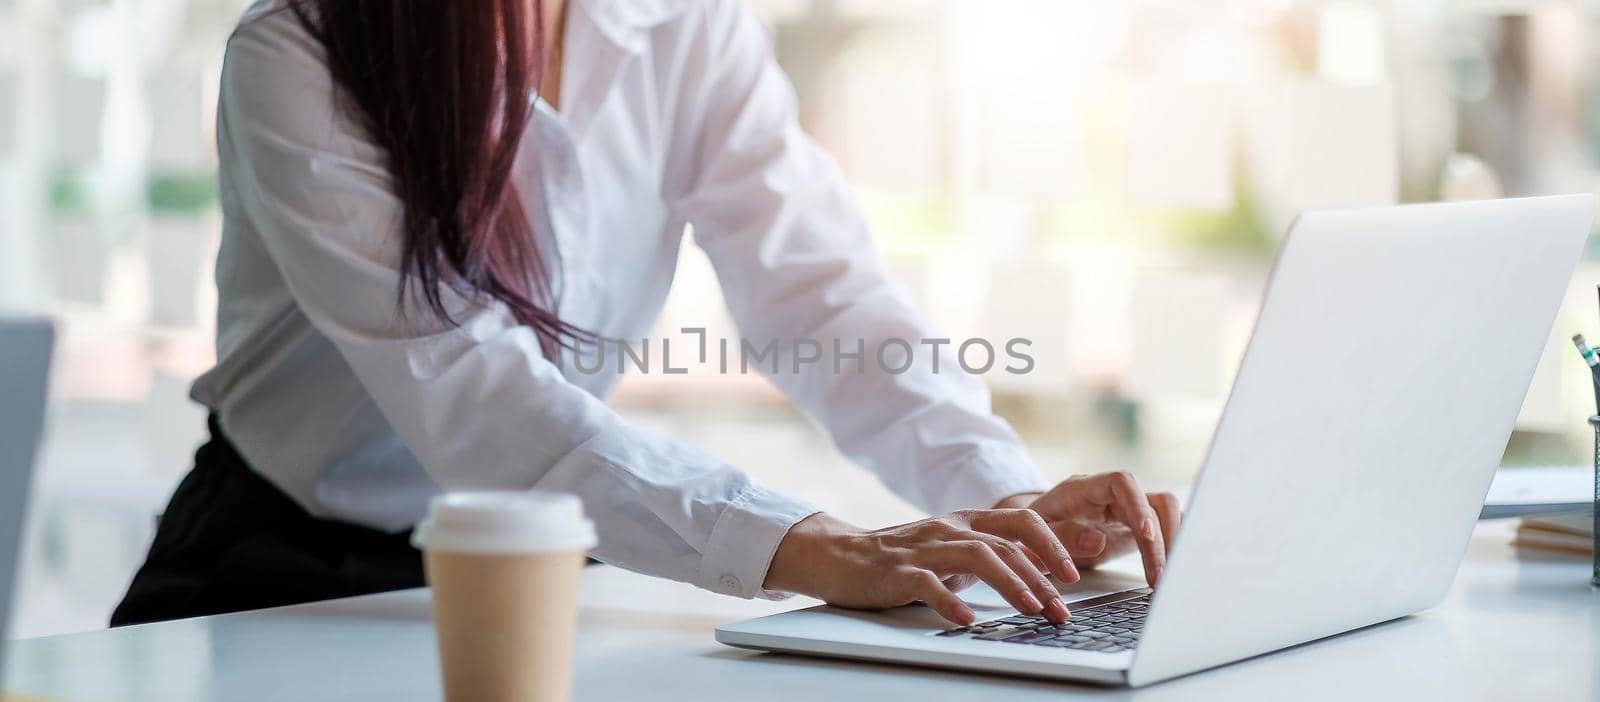 Close up of tanned woman's hands on a computer keyboard. She is typing. There is a piece of paper with blue graphs and a cup of coffee.